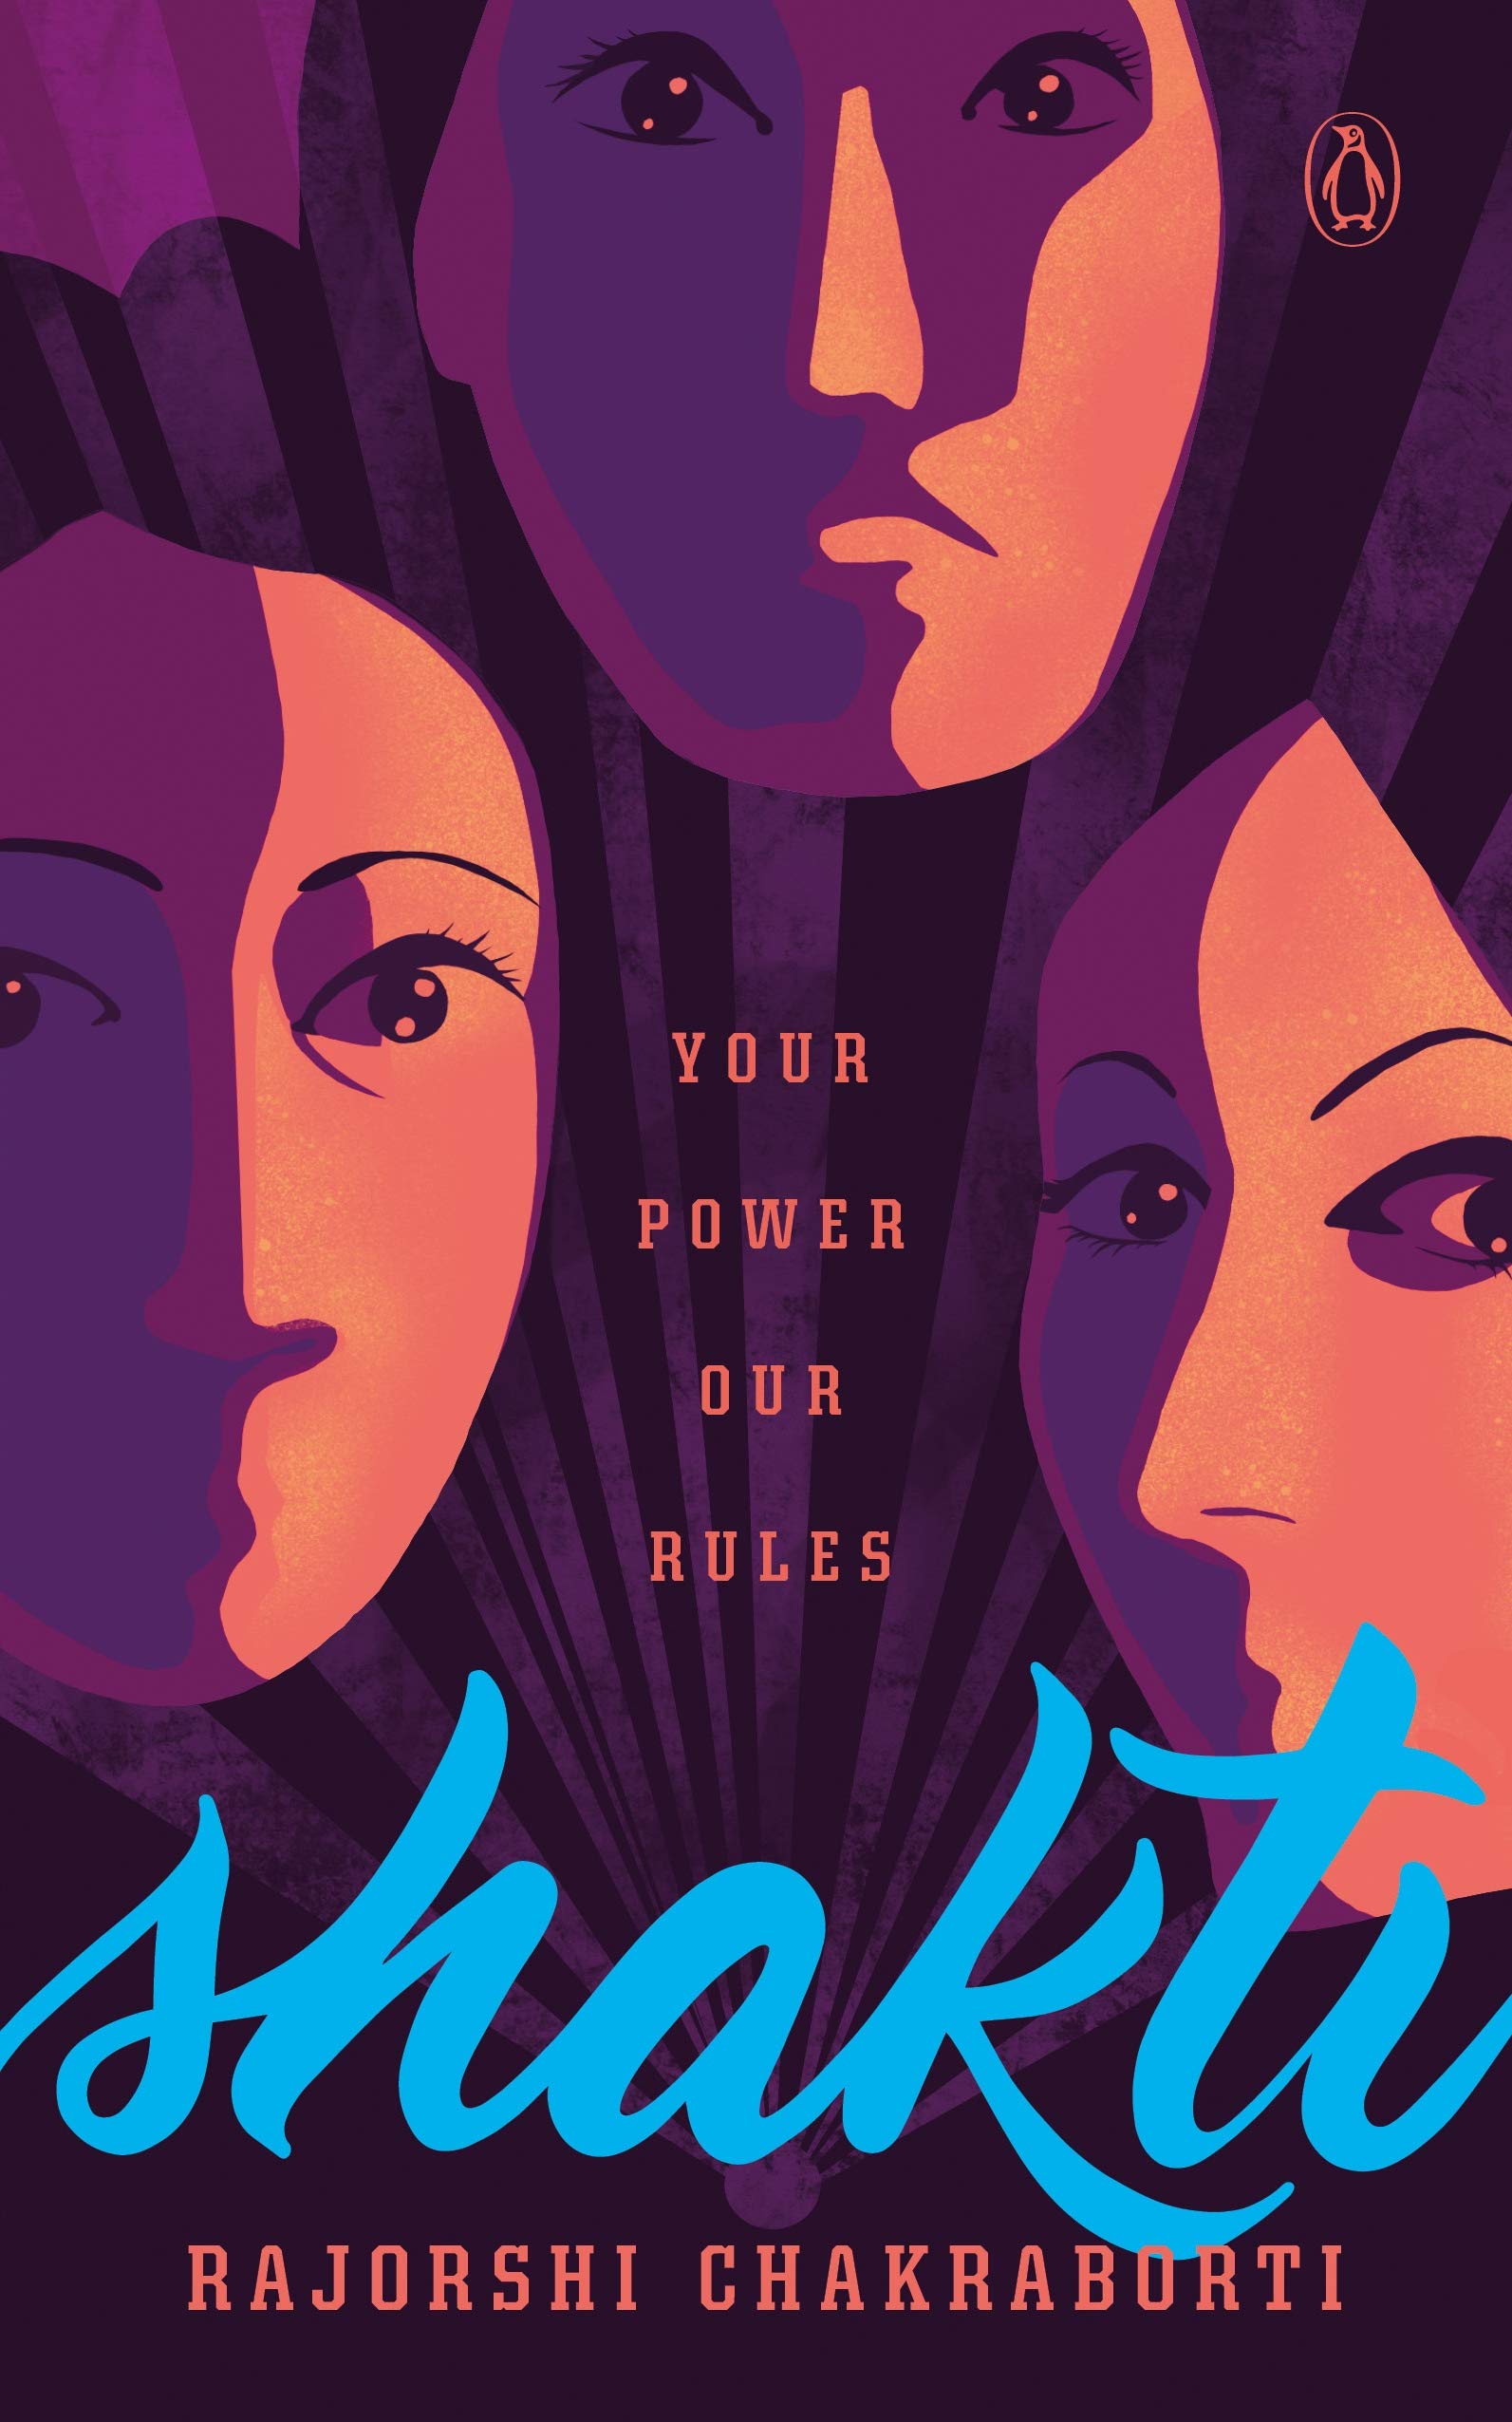 Combining elements of magical realism and fantasy, the novel "Shakti" is a sharp satire on political corruption